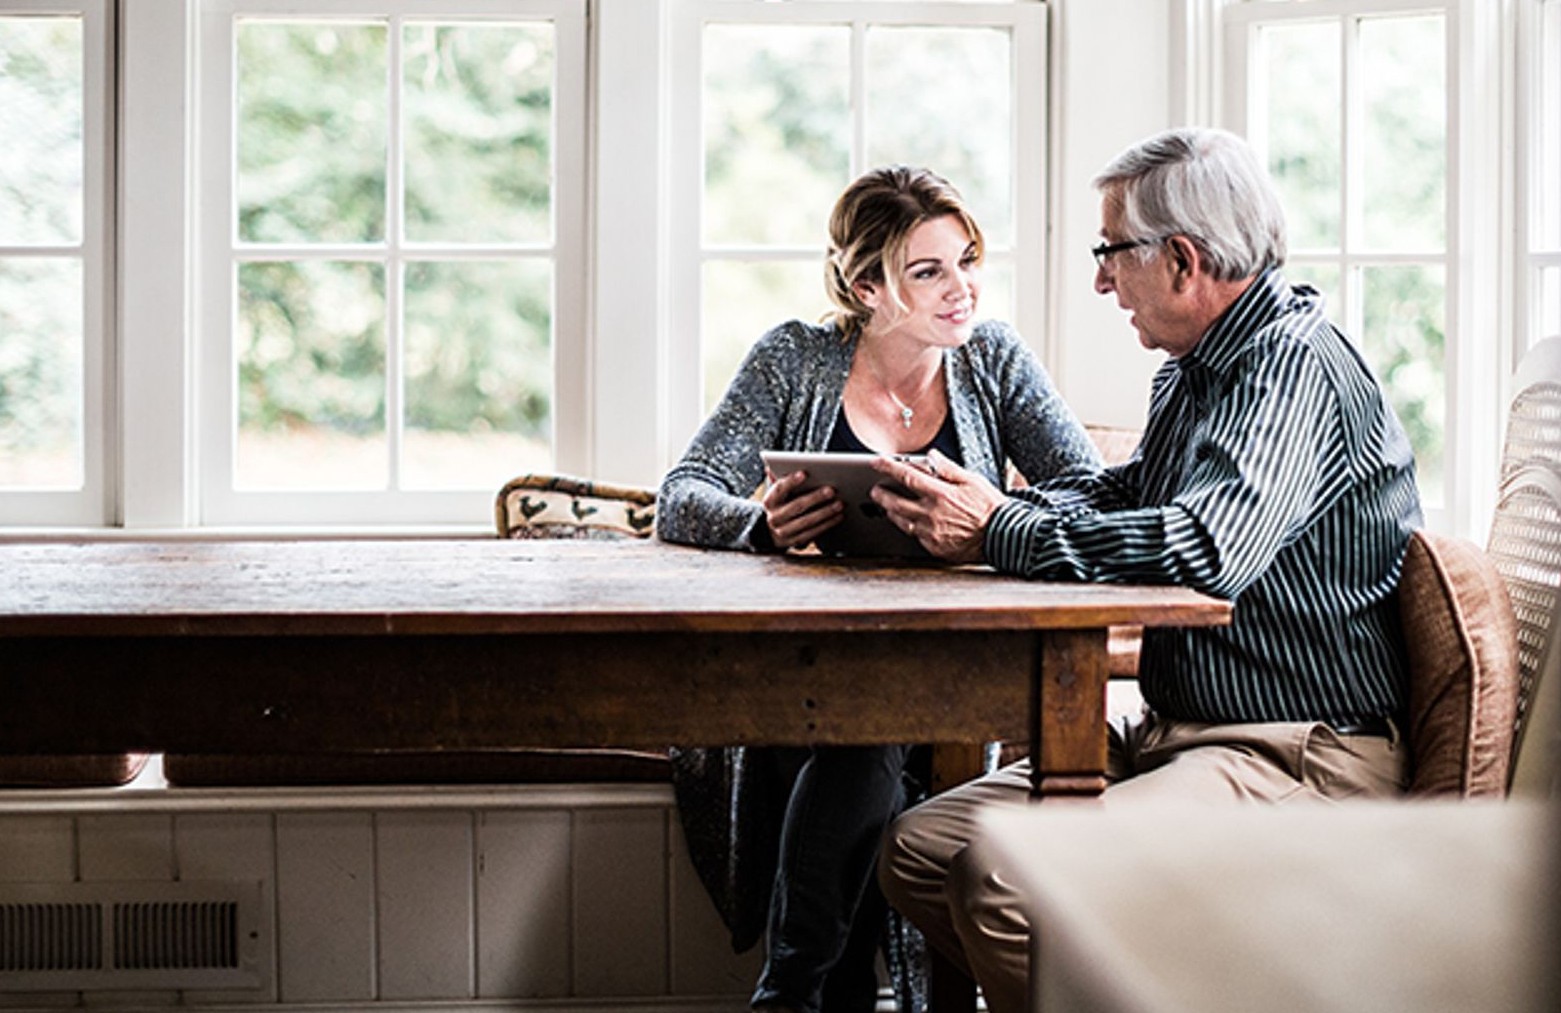 Older man being shown tablet by younger woman